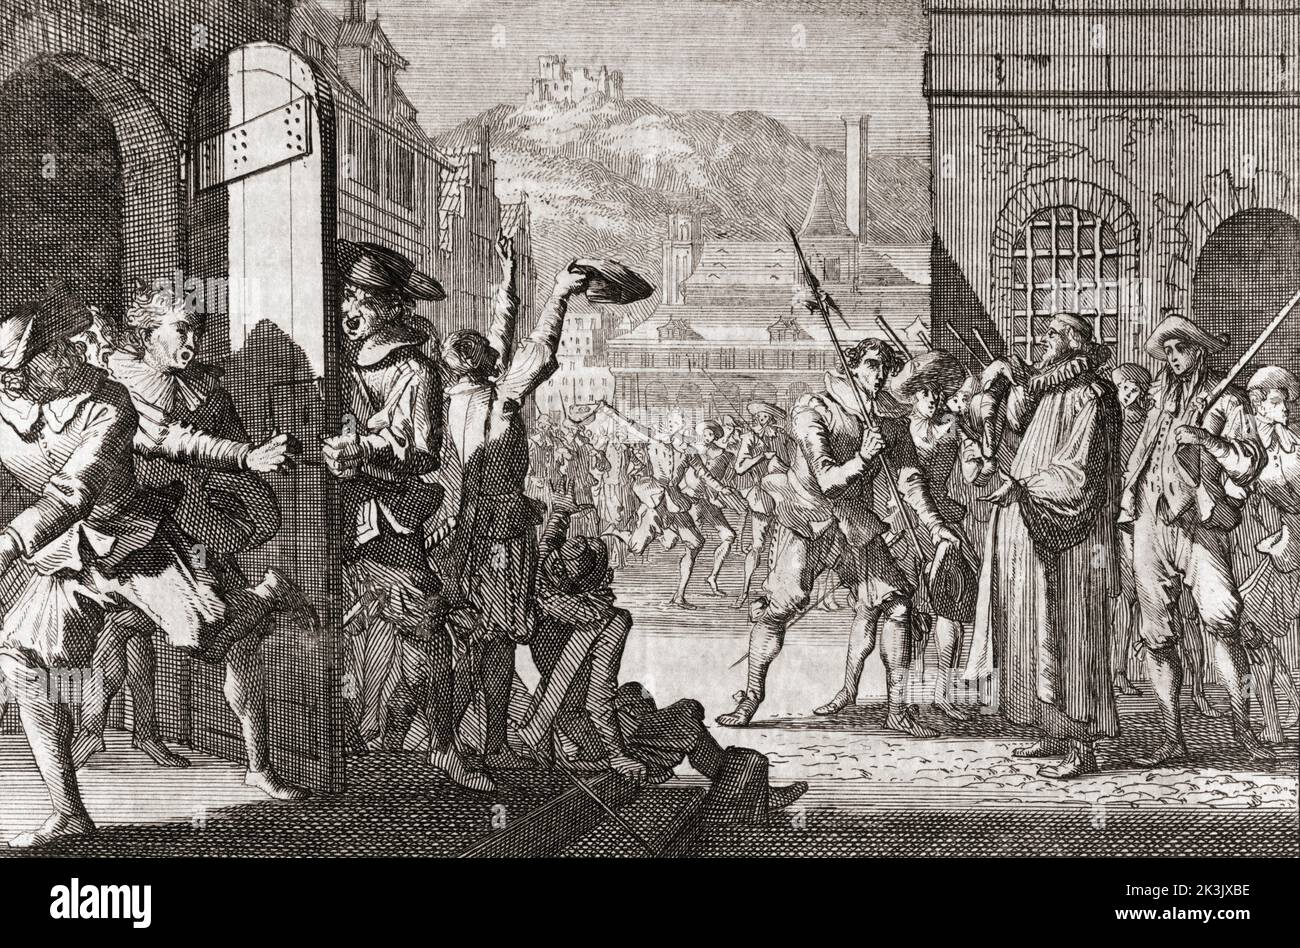 Revolt in London against Charles I, 1600 - 1649, and Bishop William Laud, 1573 - 1645.  To the right, Laud is confronted by armed citizens. Laud was appointed Archbishop of Canterbury by King Charles I.  Both were Anglican High Church supporters.   Both men, king and bishop, were accused of treason and executed.  After a work in the style of Caspar Luyken. Stock Photo